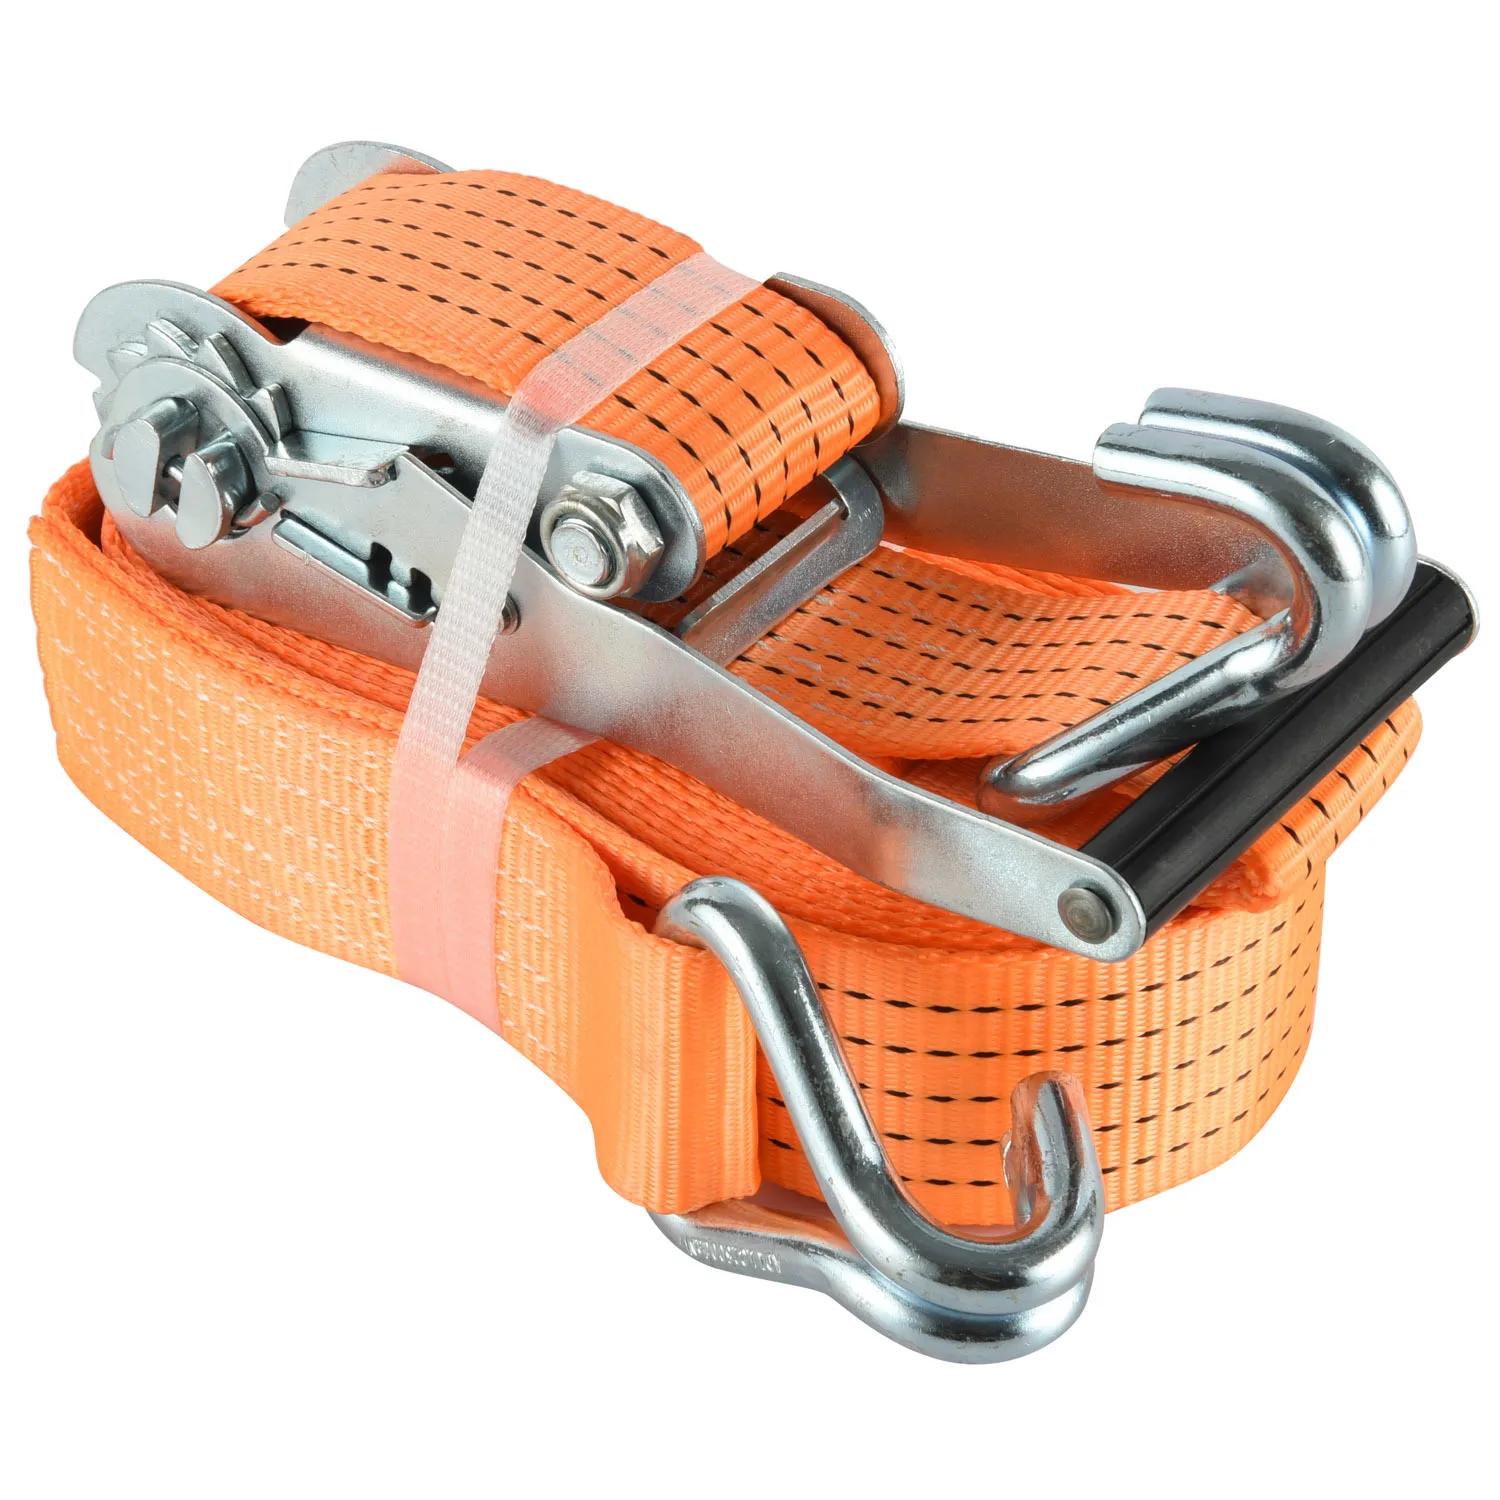 The industry standard for Working Load Limit is 13 of the Assembly Break Strength. The strength of each component of an assembly. For example, on a 2” Ratchet Strap with Flat Hooks, the ratchet strength is 11,000 lbs,